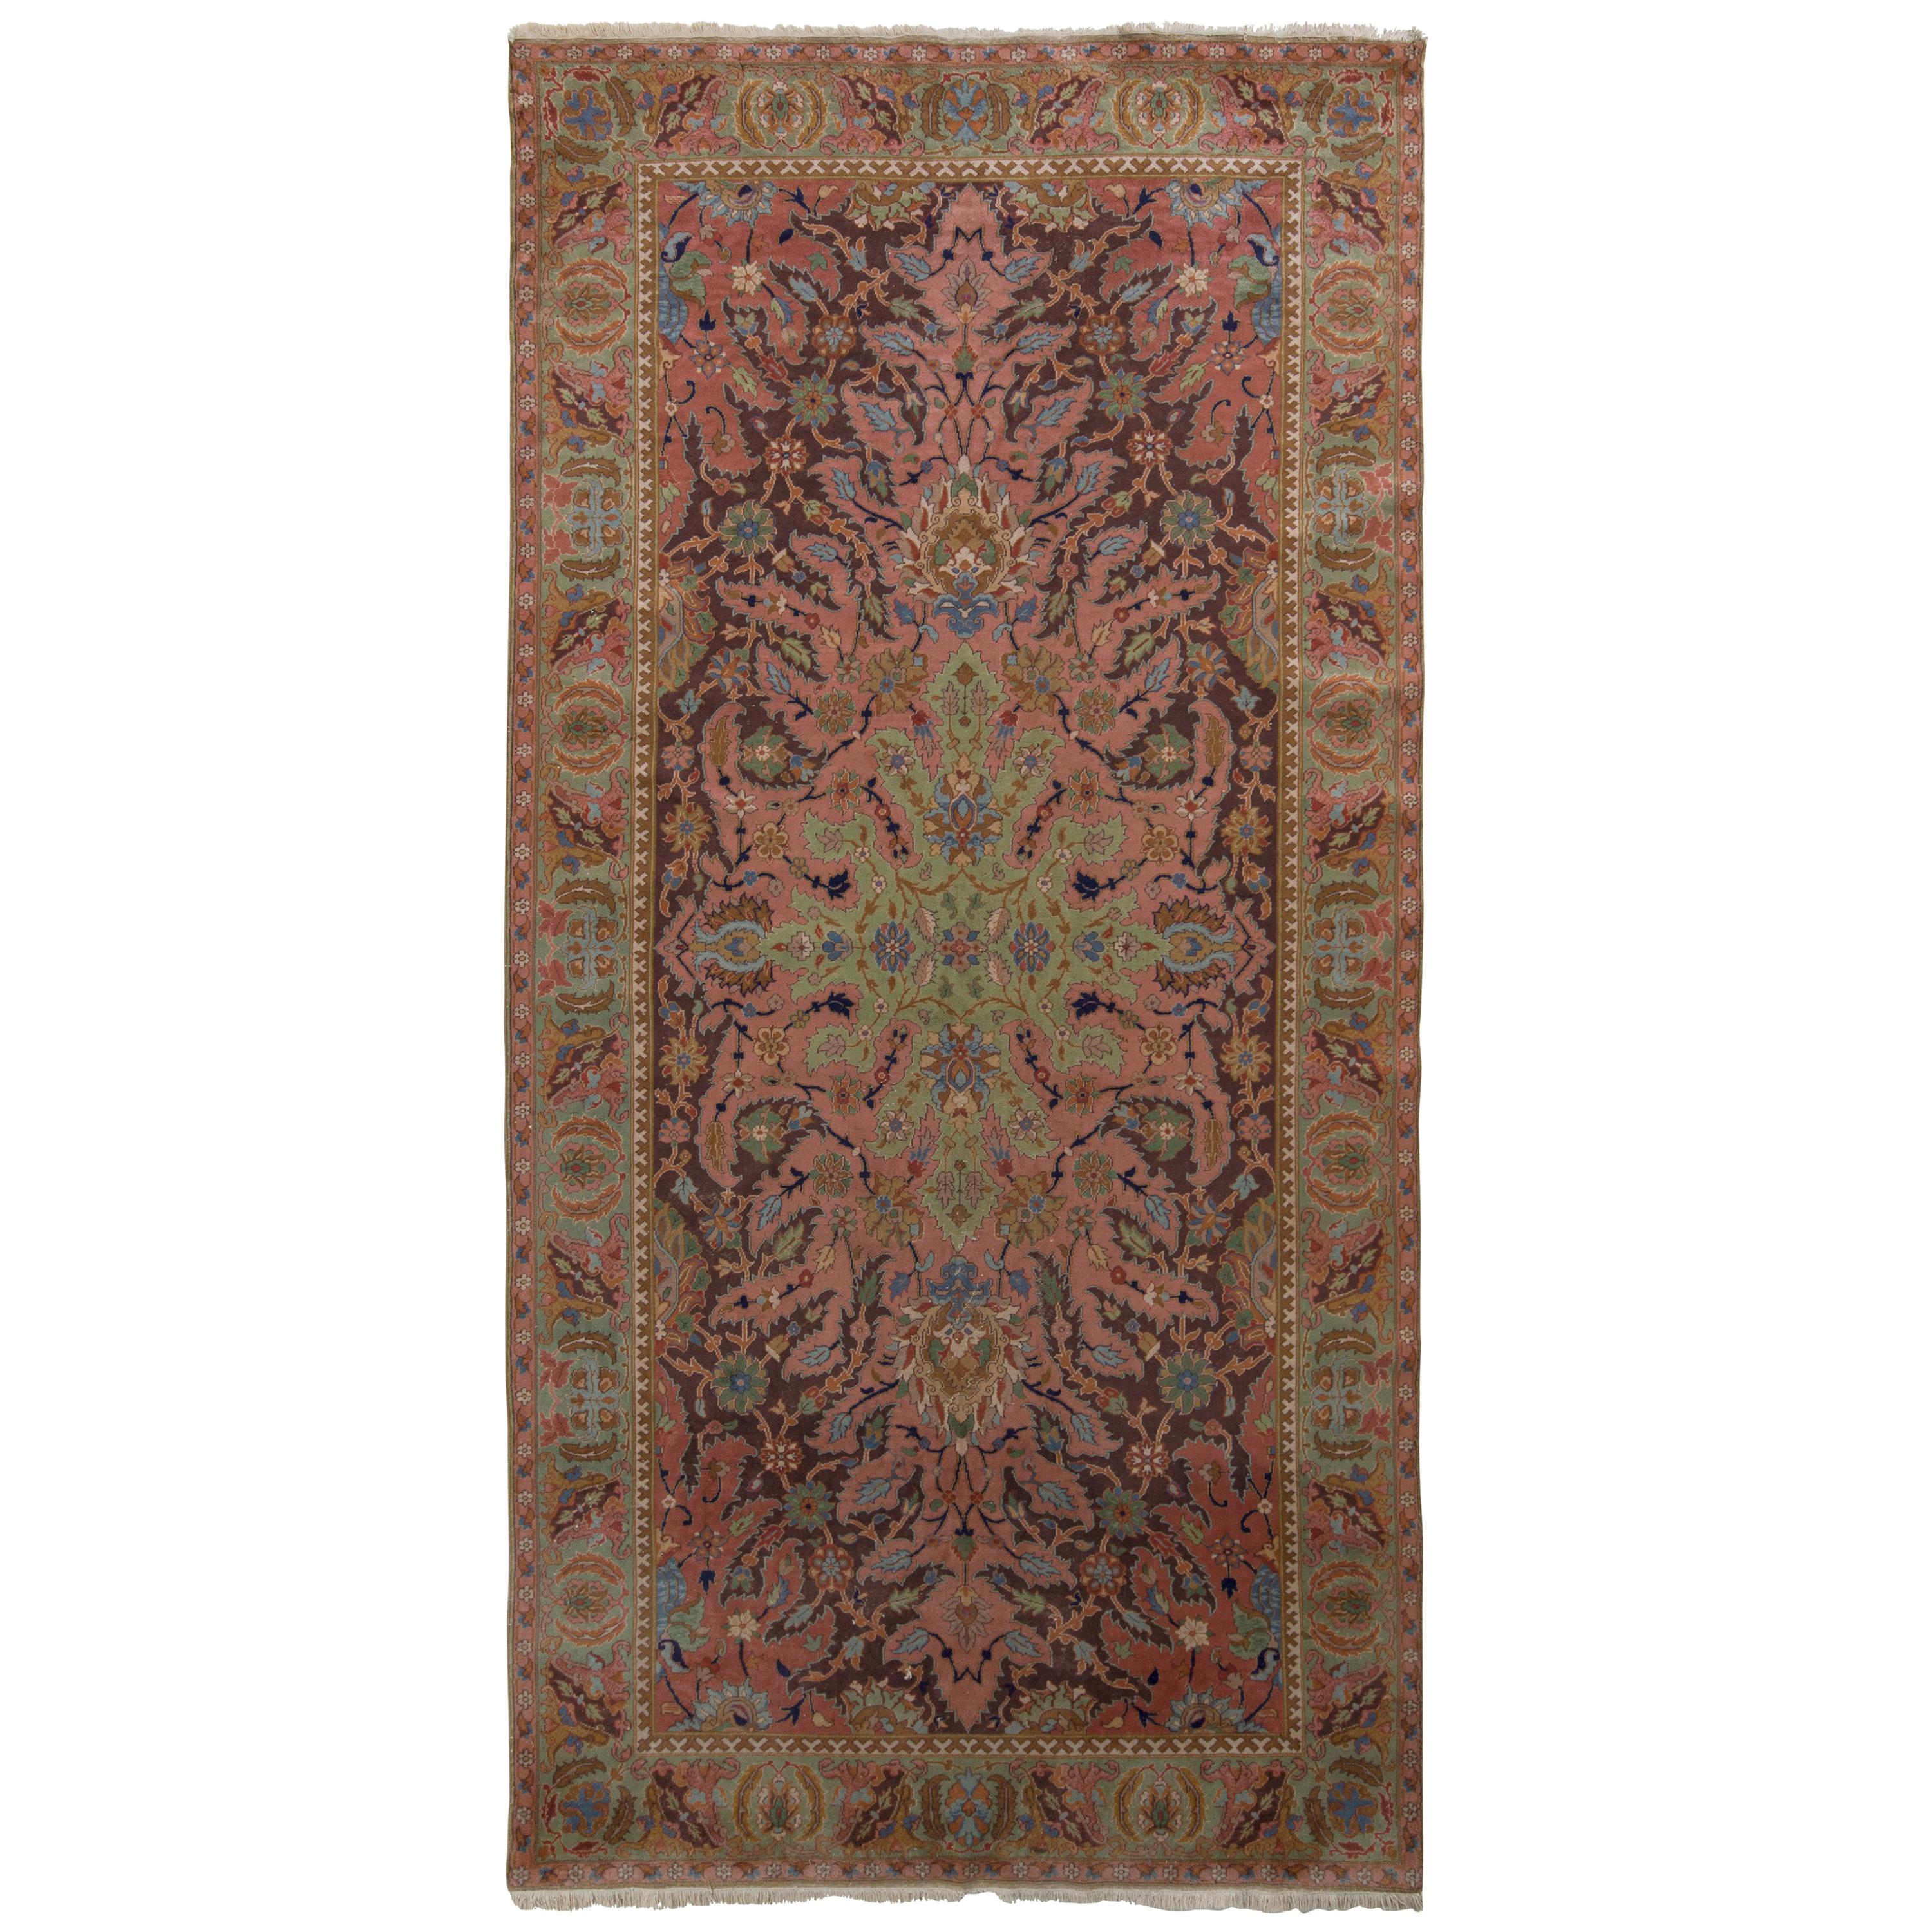 Hand Knotted Antique Polonaise Rug in Pink Green Floral Pattern